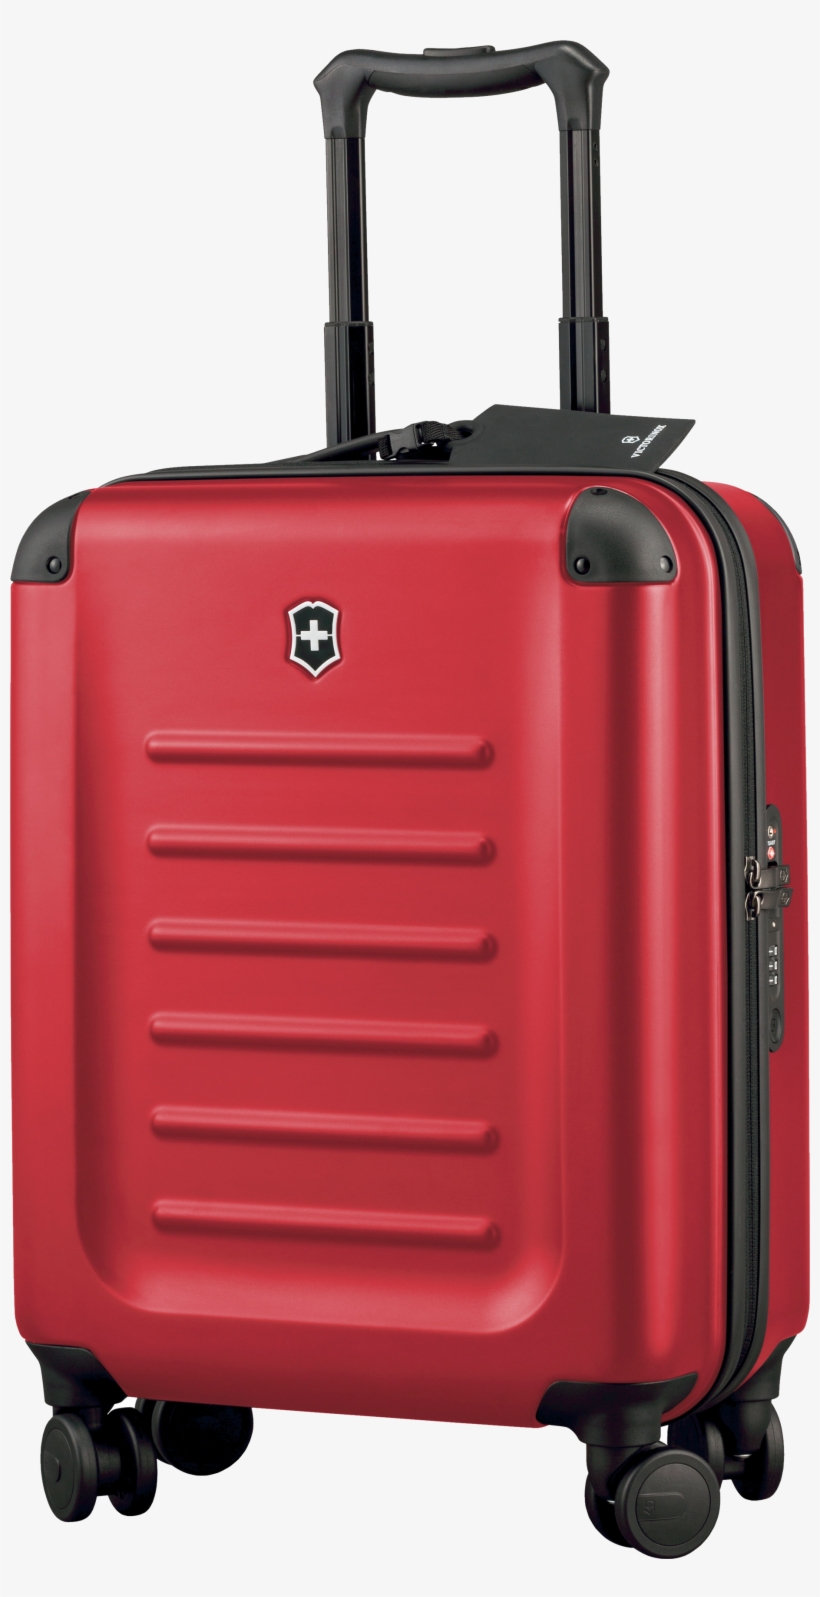 Red Suitcase Png Image, transparent png #726435